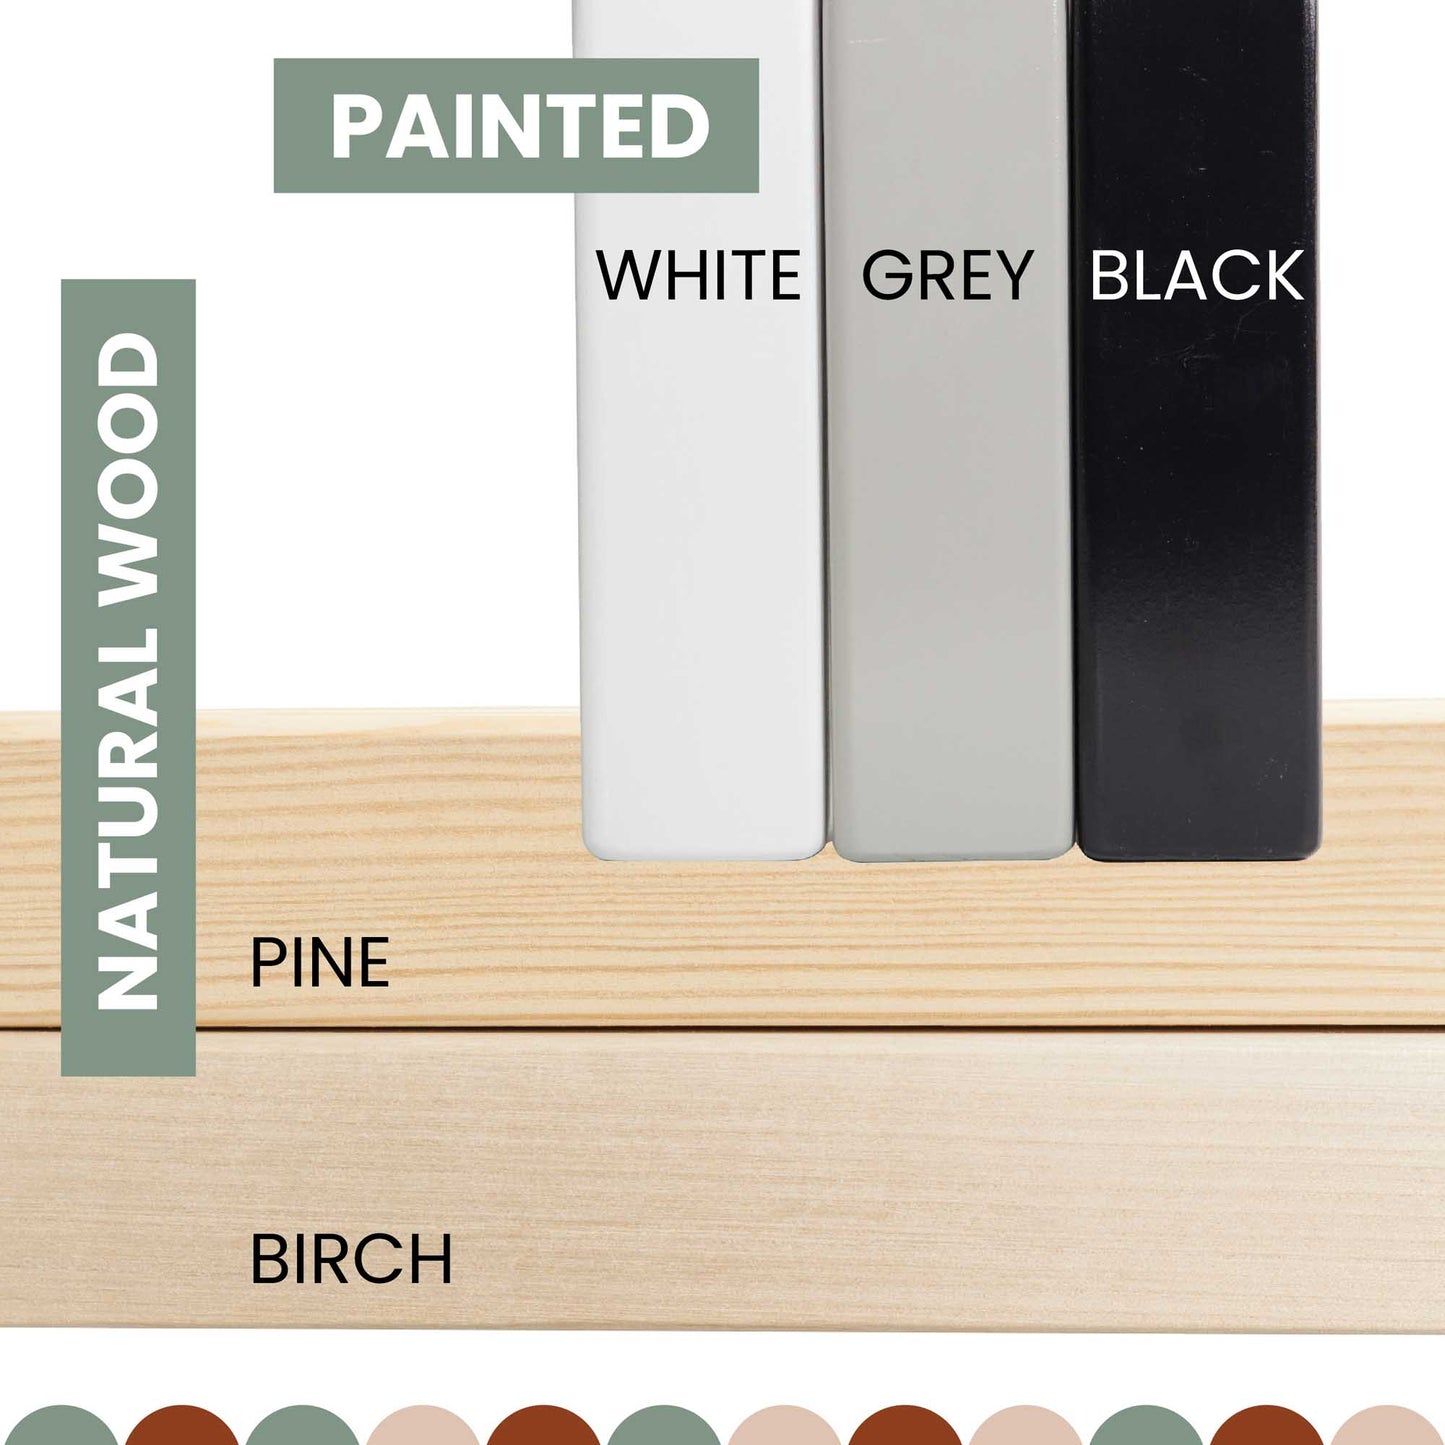 The paint colors for solid wood and Montessori-inspired Toddler bed with a headboard.